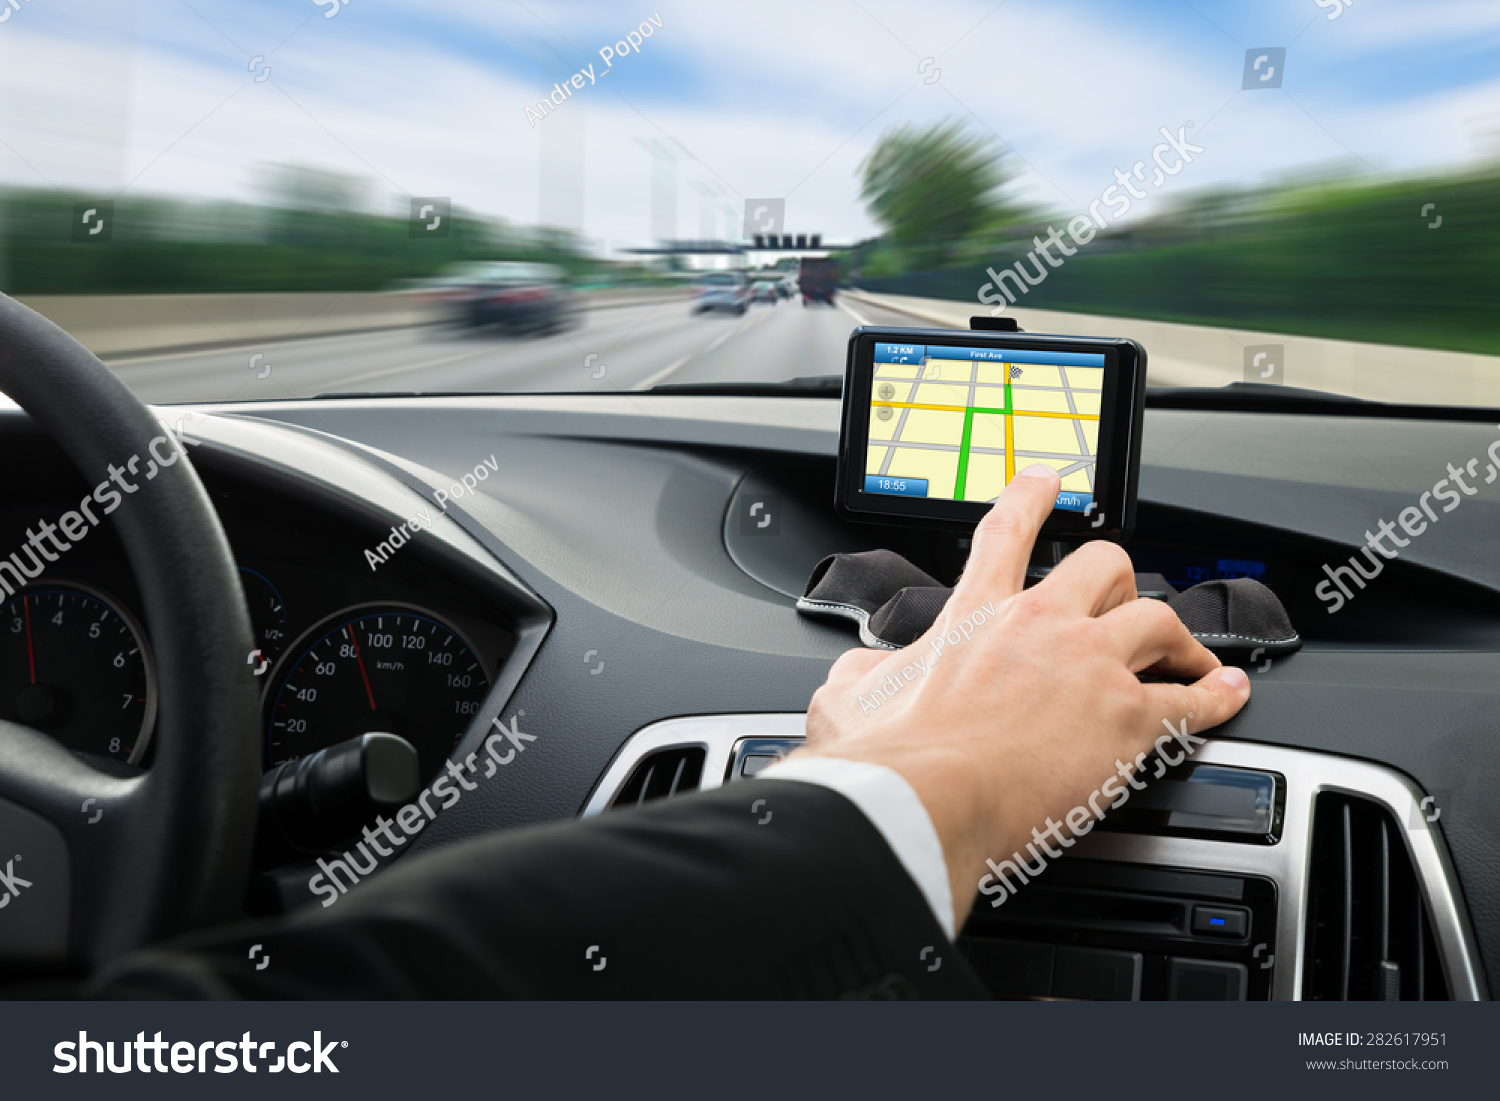 Close-up Of A Person's Hand Using Gps Navigation System In Car #282617951